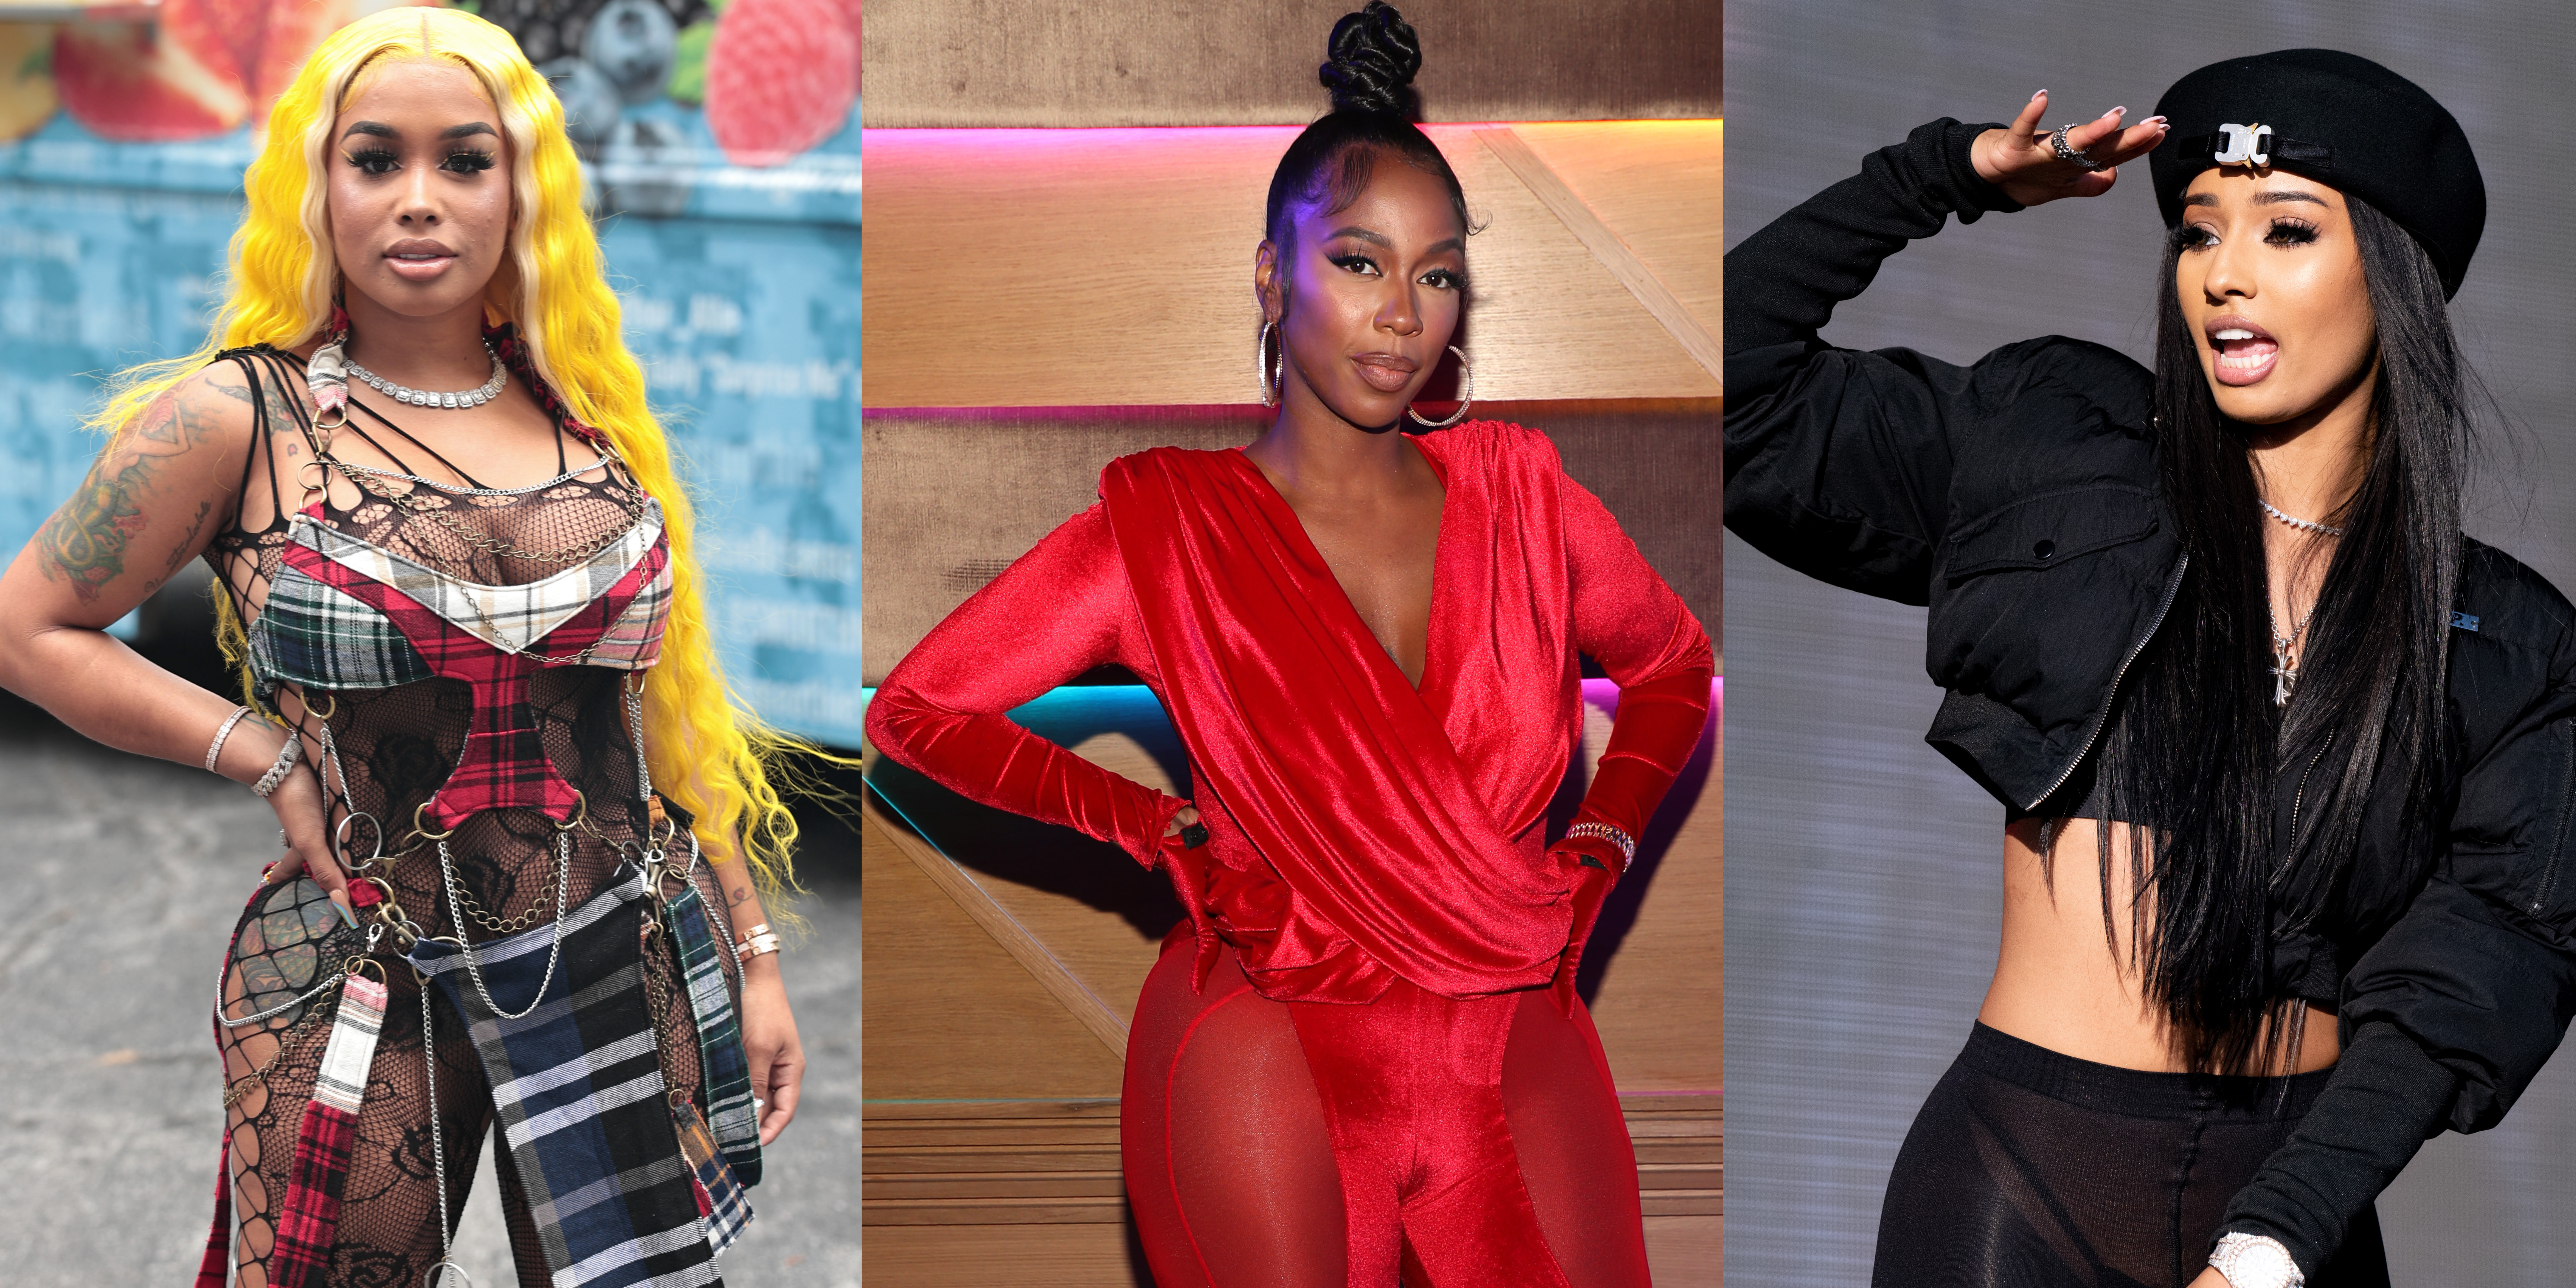 This Viral TikTok Song Just Got A Major Remix Featuring DreamDoll, Kash Doll, and Rubi Rose